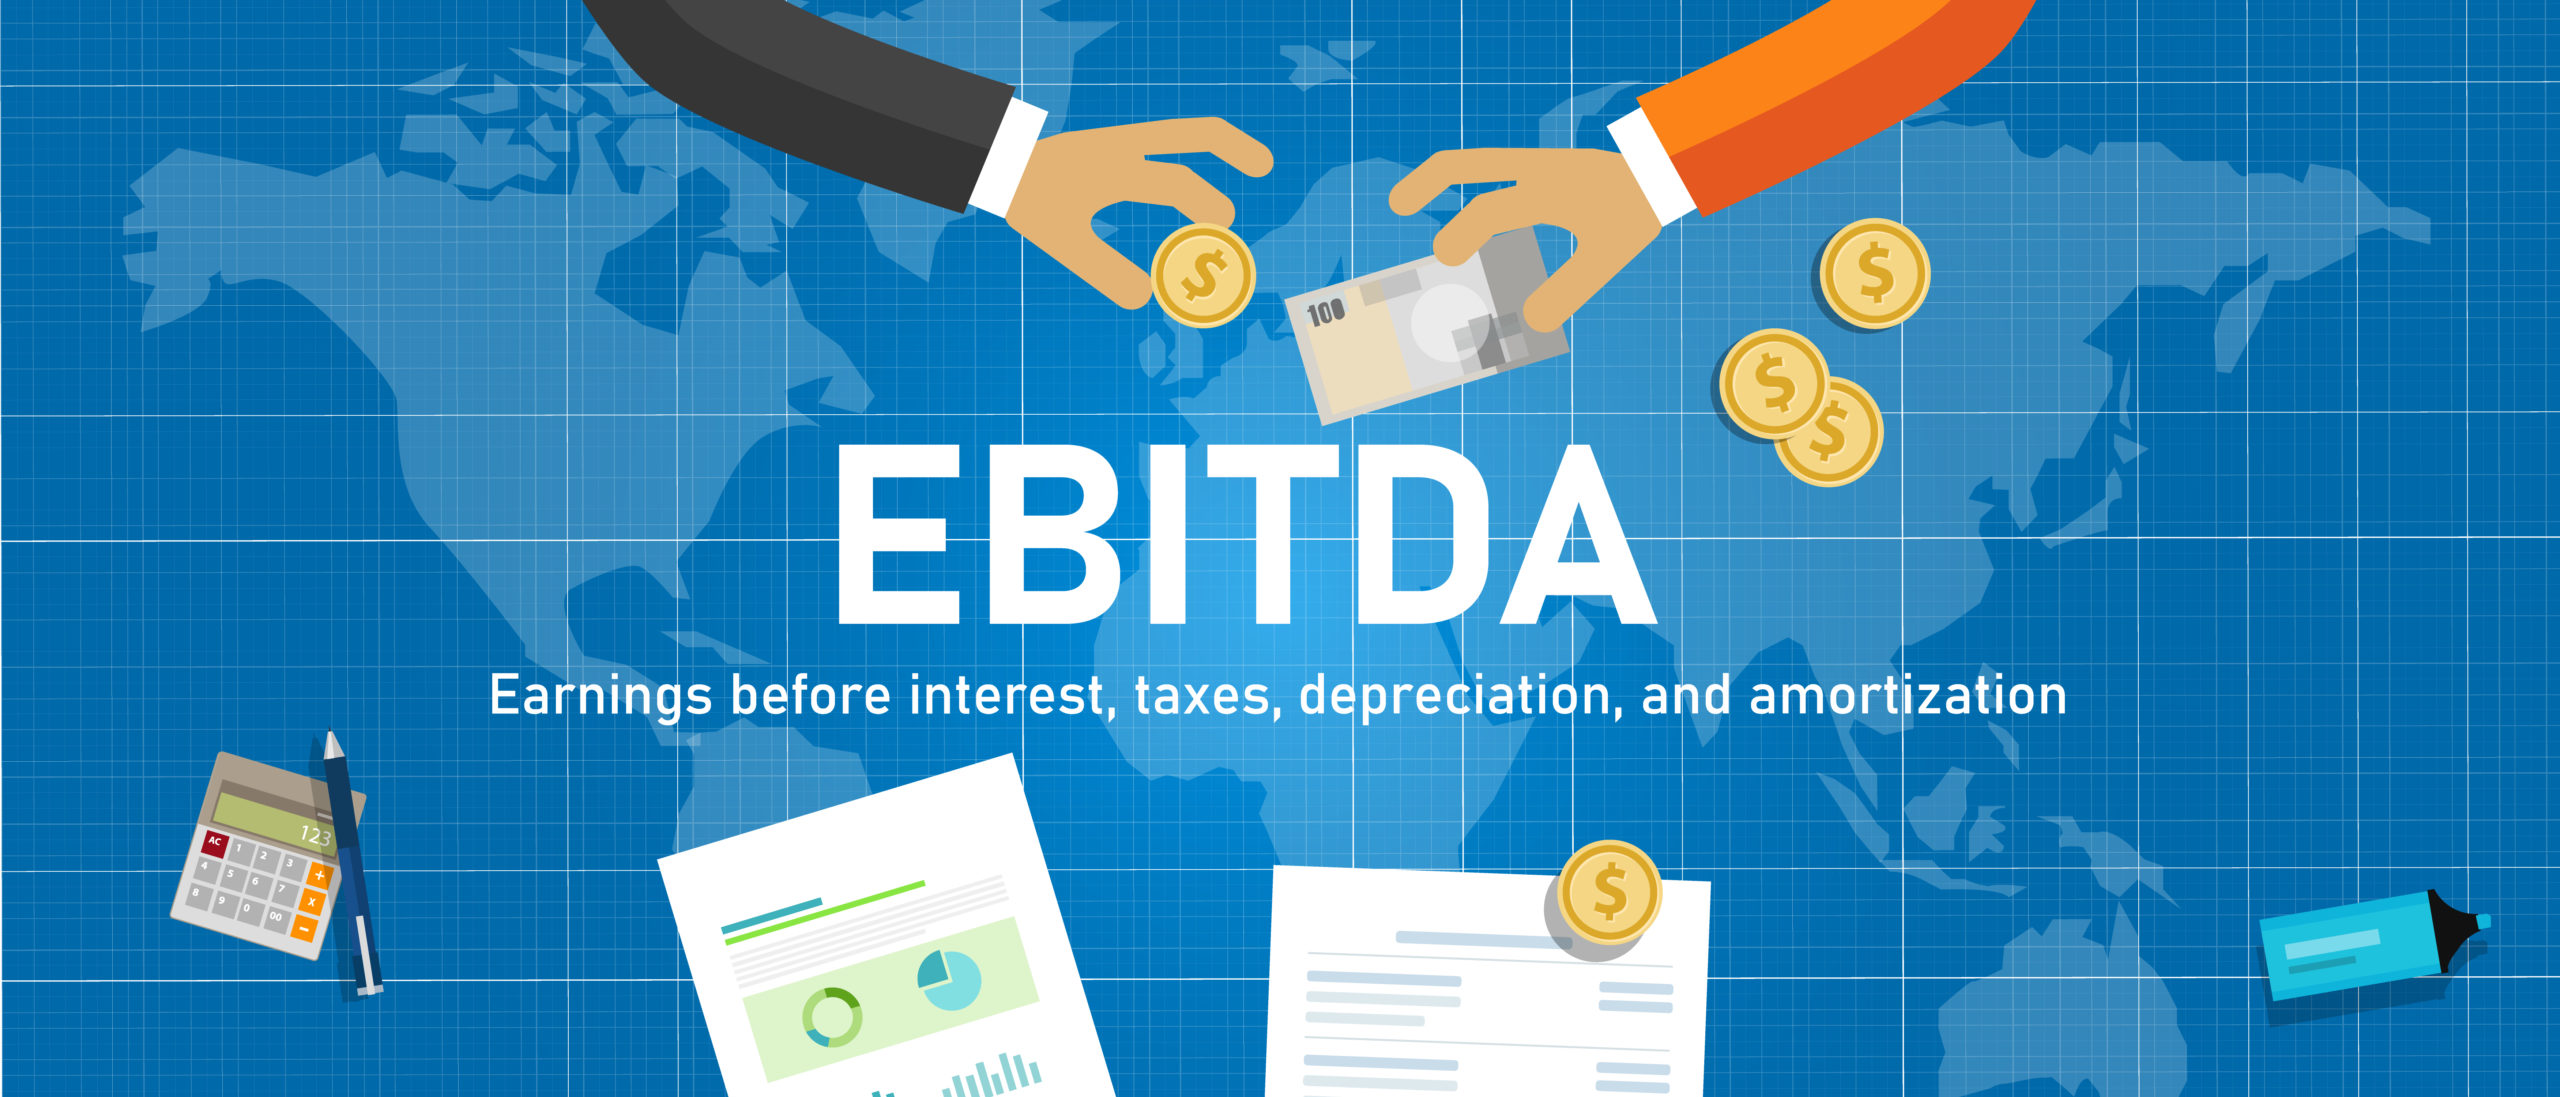 What is EBITDA